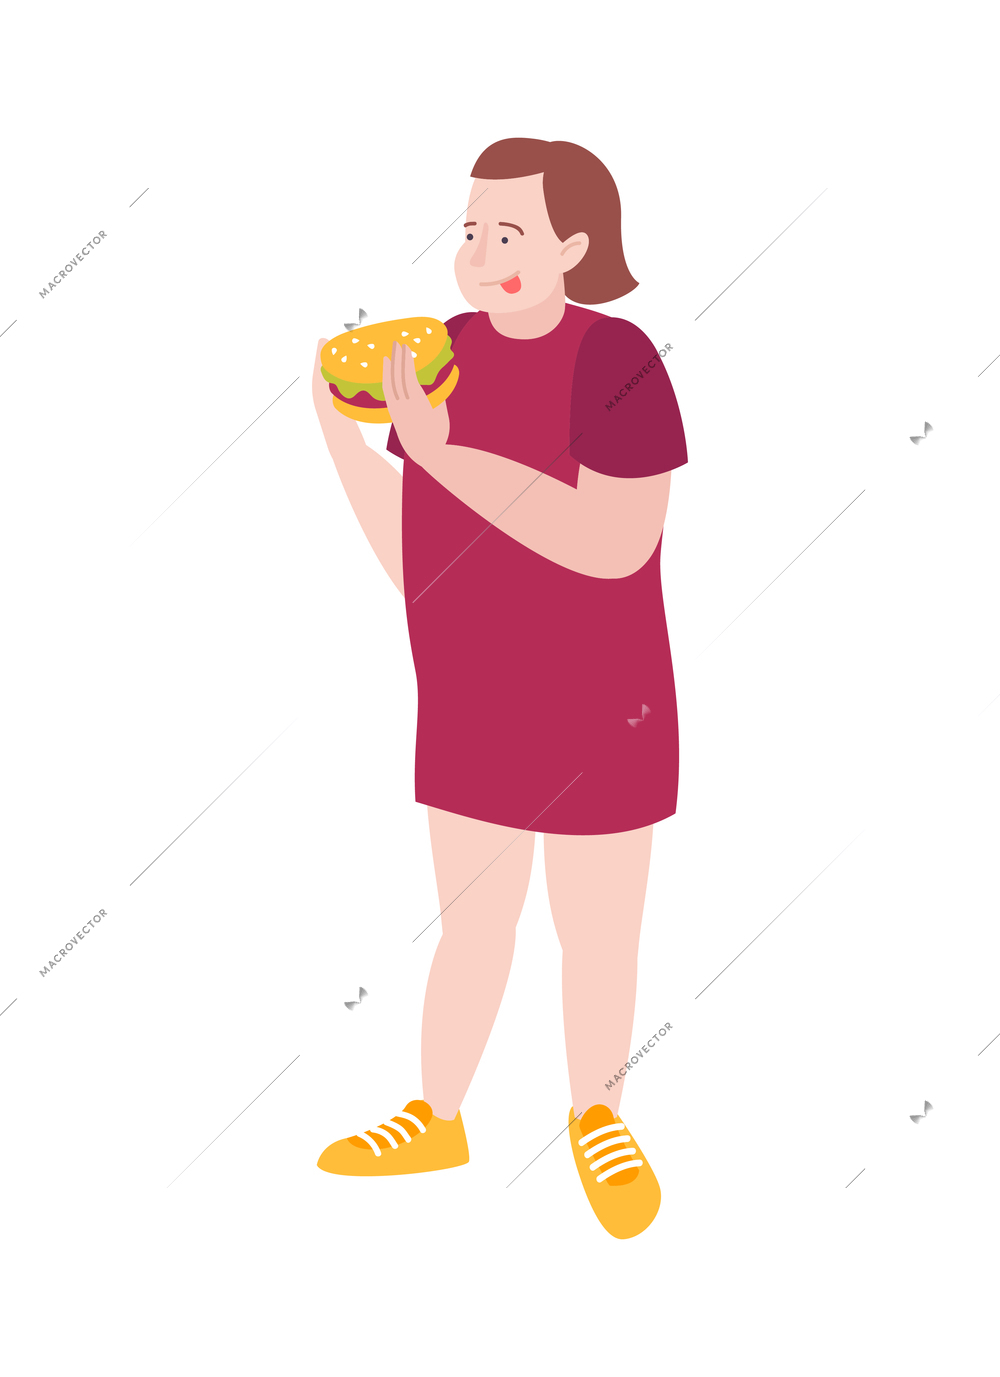 Fat people obesity composition with isolated doodle character of girl eating burger vector illustration